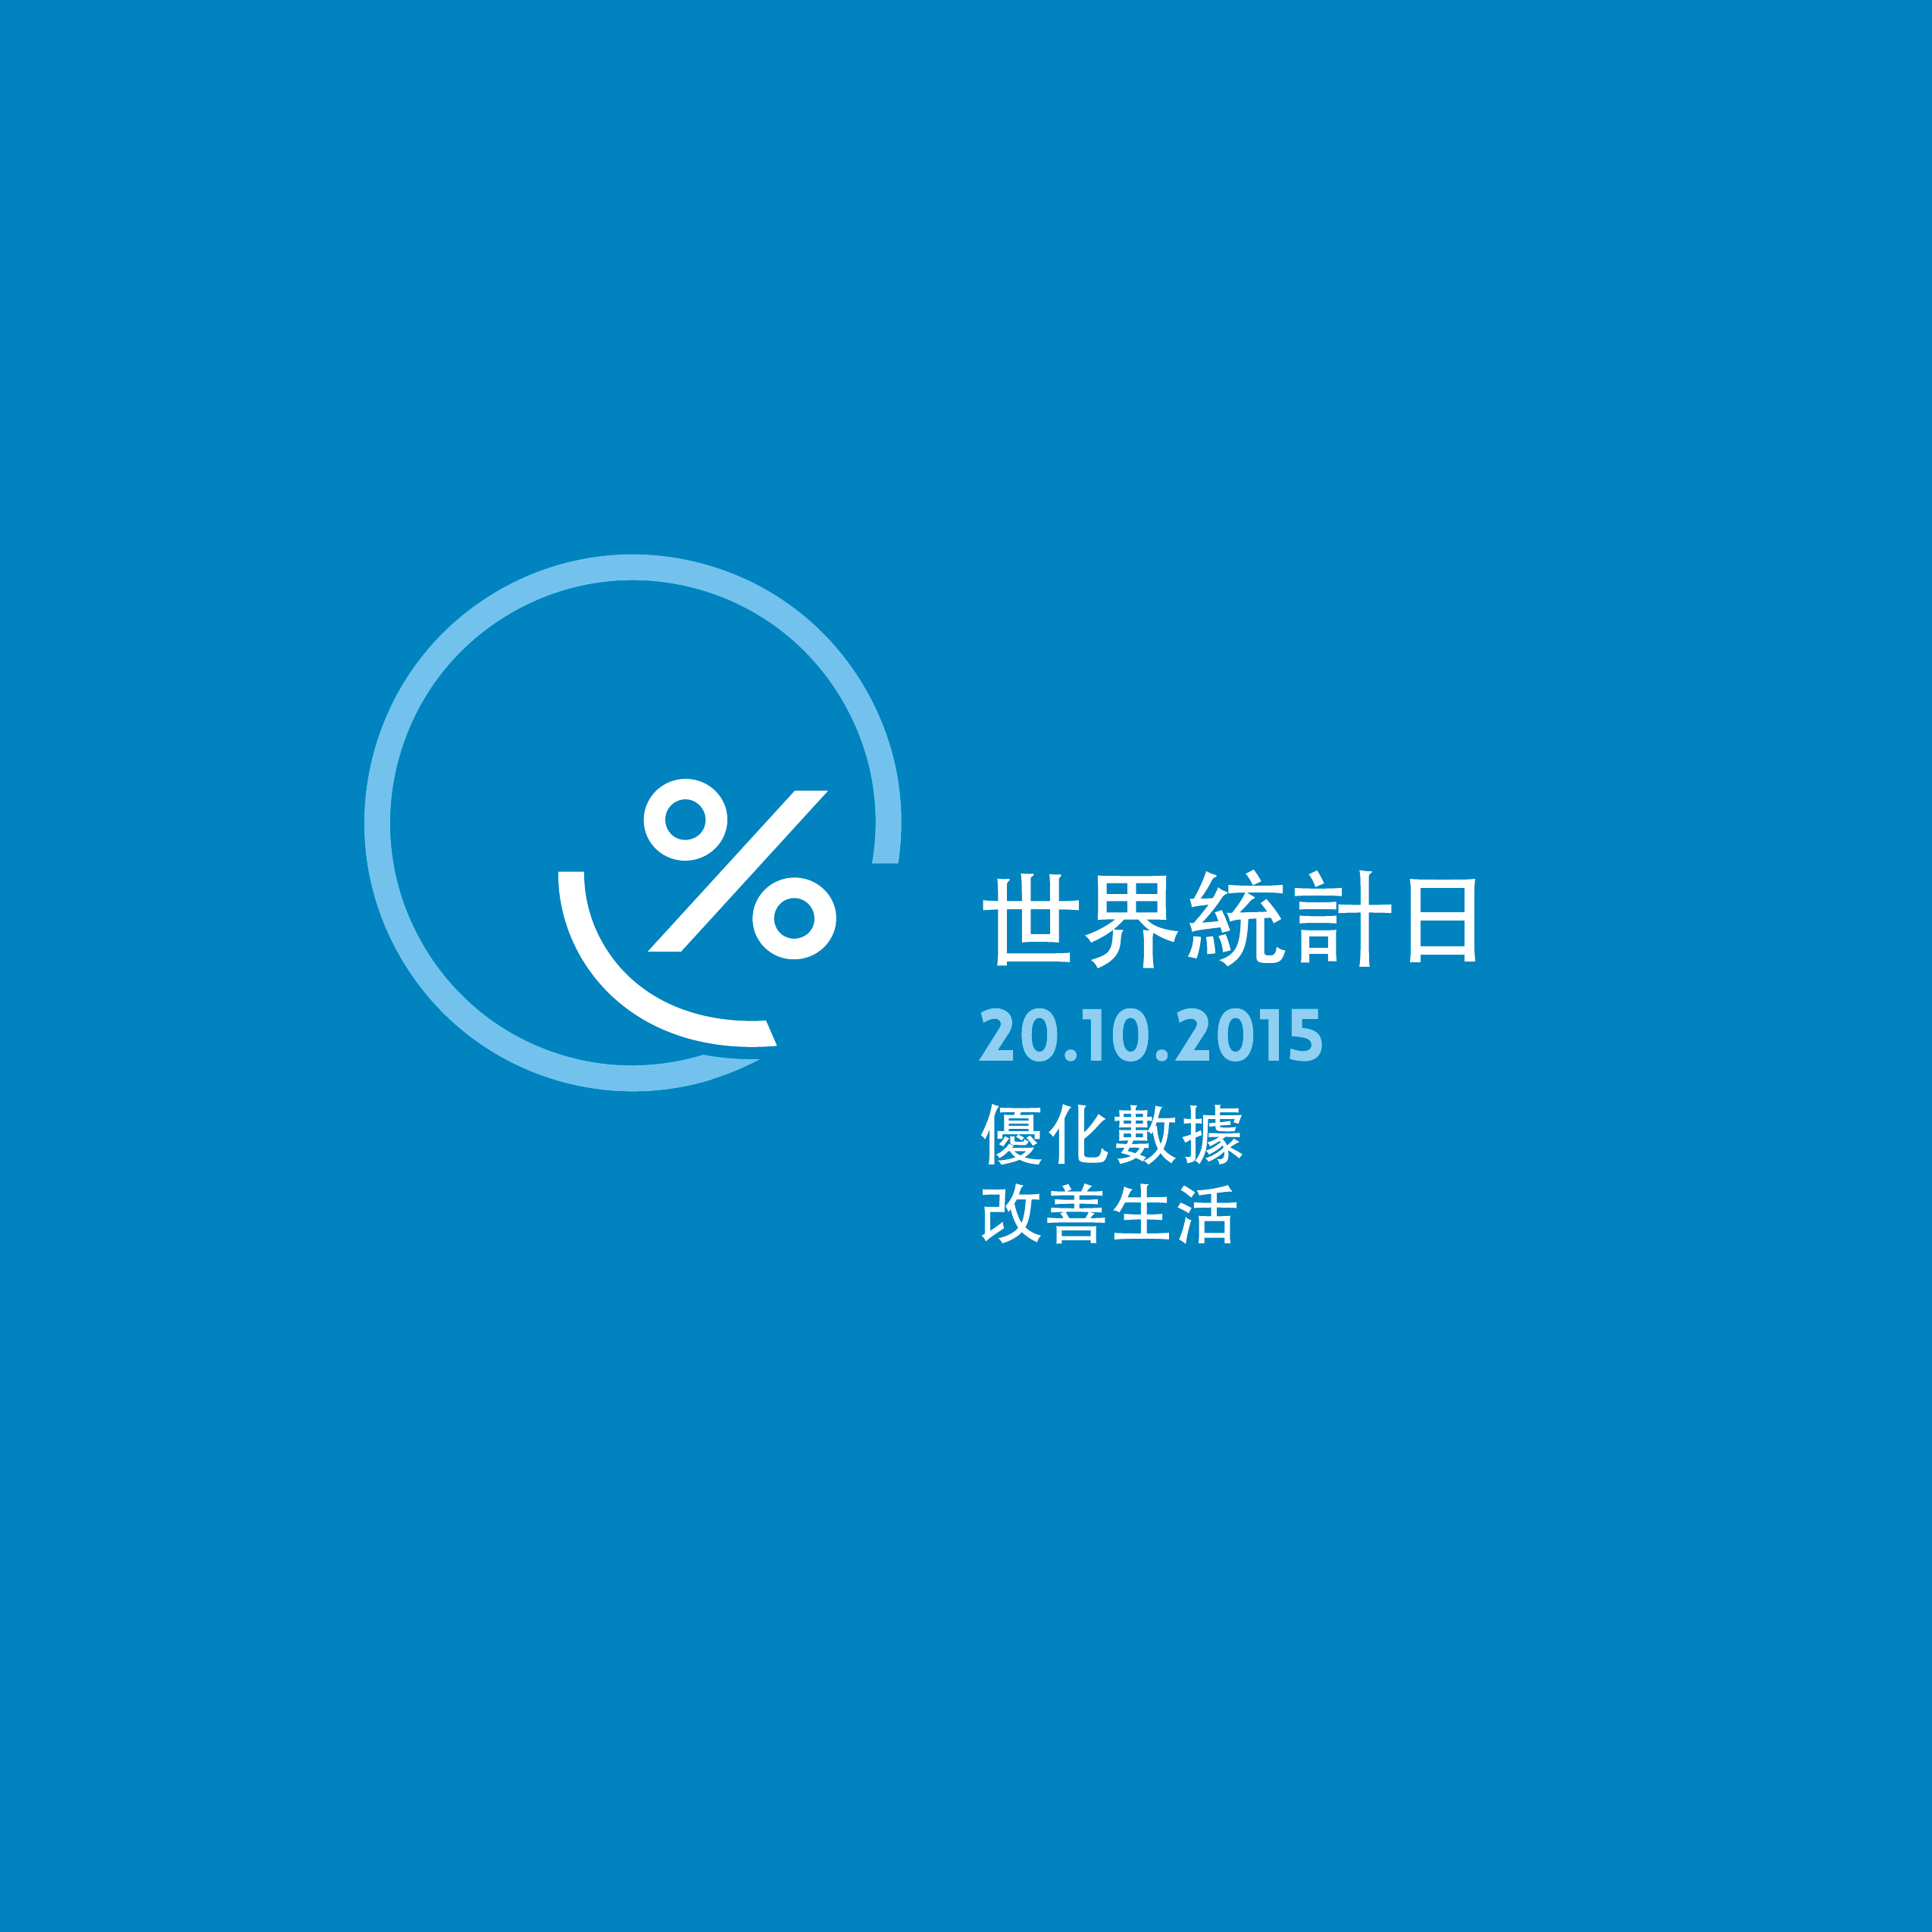 World Statistics Day Logo in Chinese Traditional